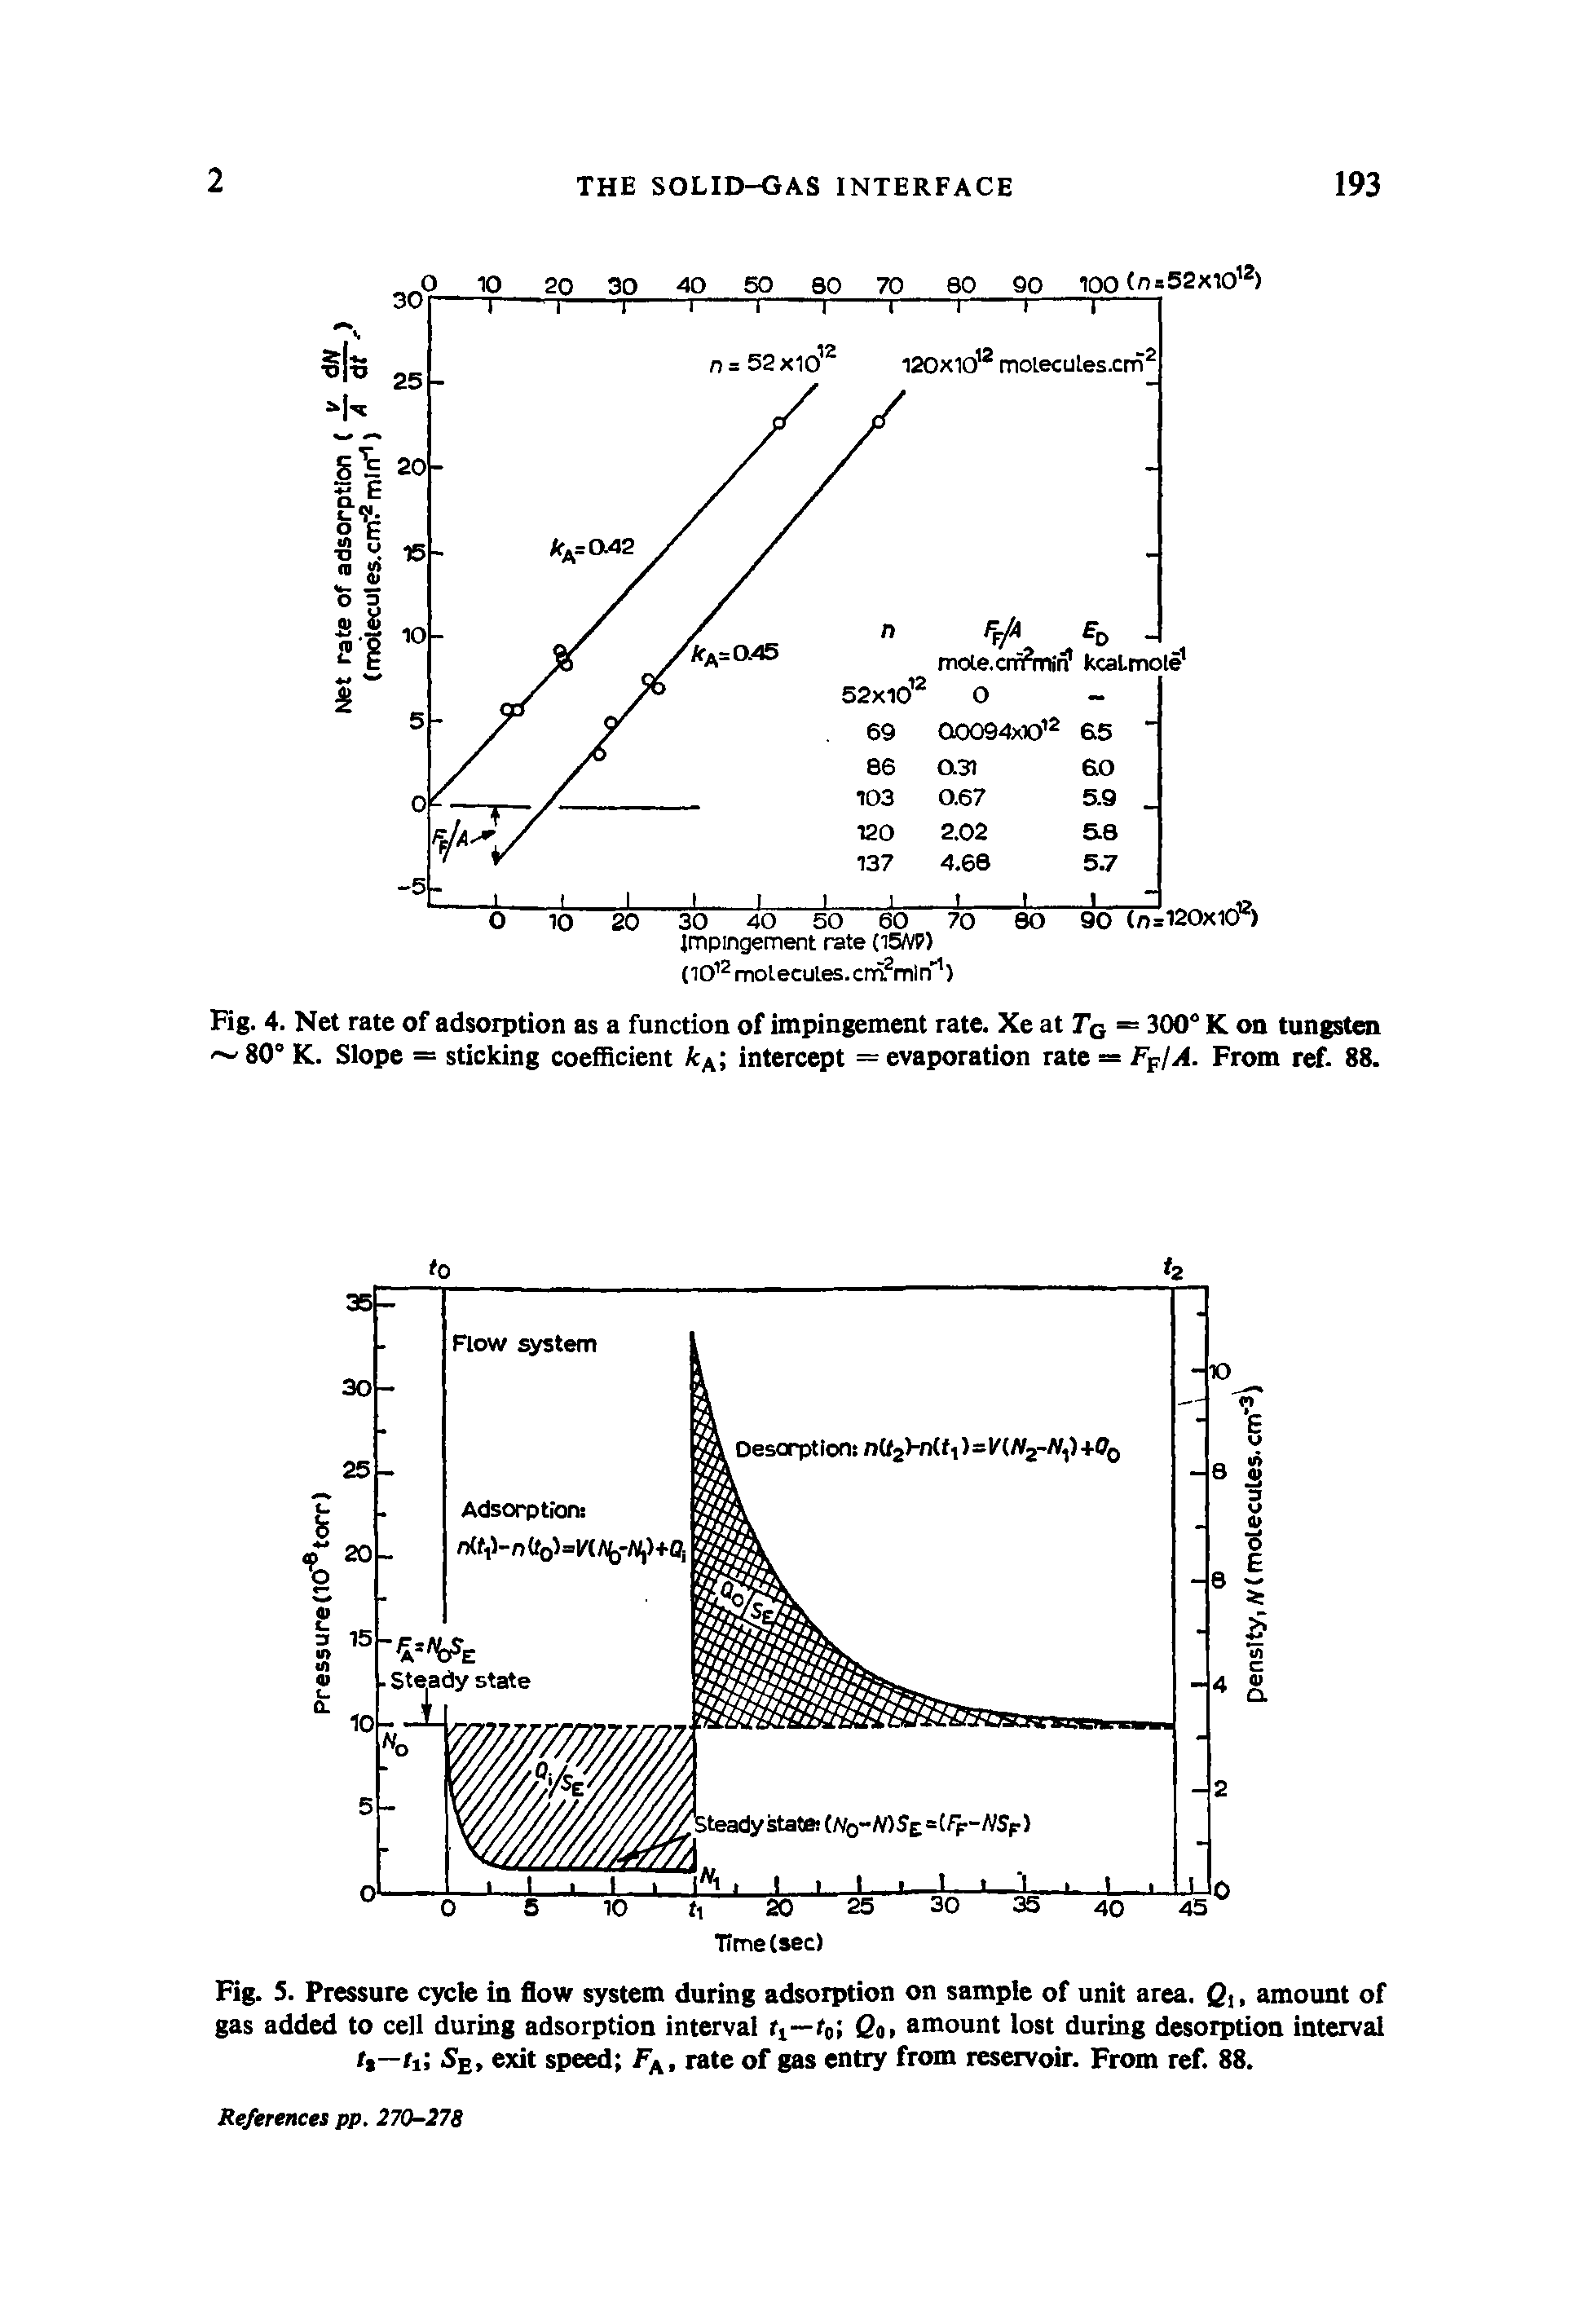 Fig. 4. Net rate of adsorption as a function of impingement rate. Xe at Tq = 300° K on tungsten 80° K. Slope = sticking coefficient intercept = evaporation rate = F-pfA. From ref. 88.